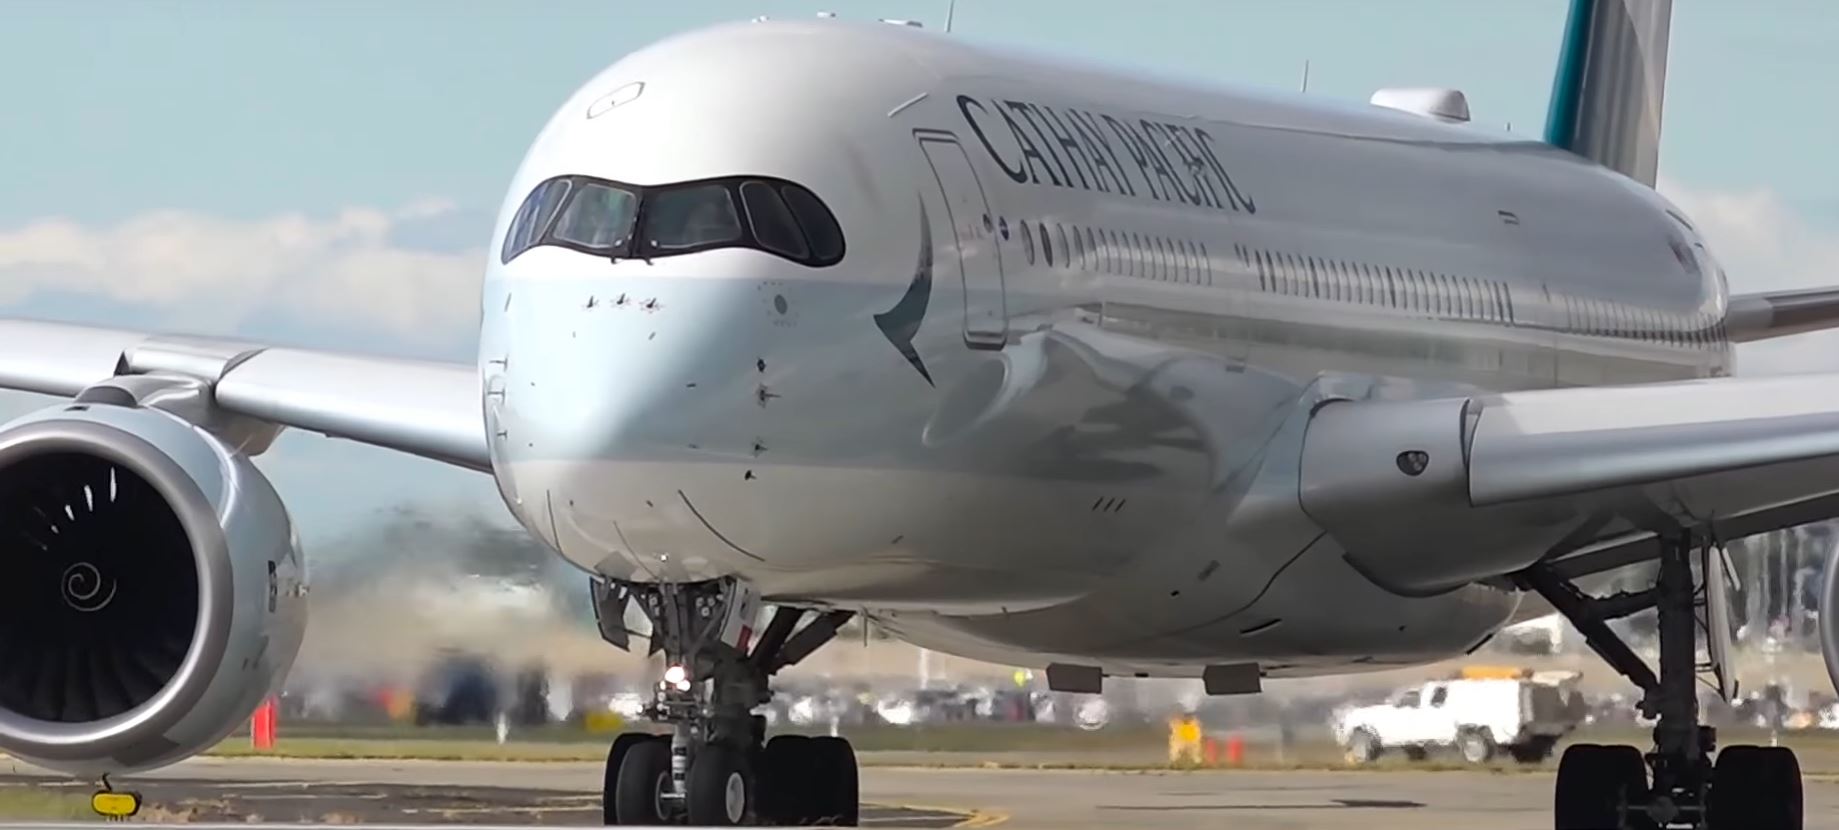 Cathay Pacific Airbus A350-900 Close-up Takeoff @ Melbourne Airport